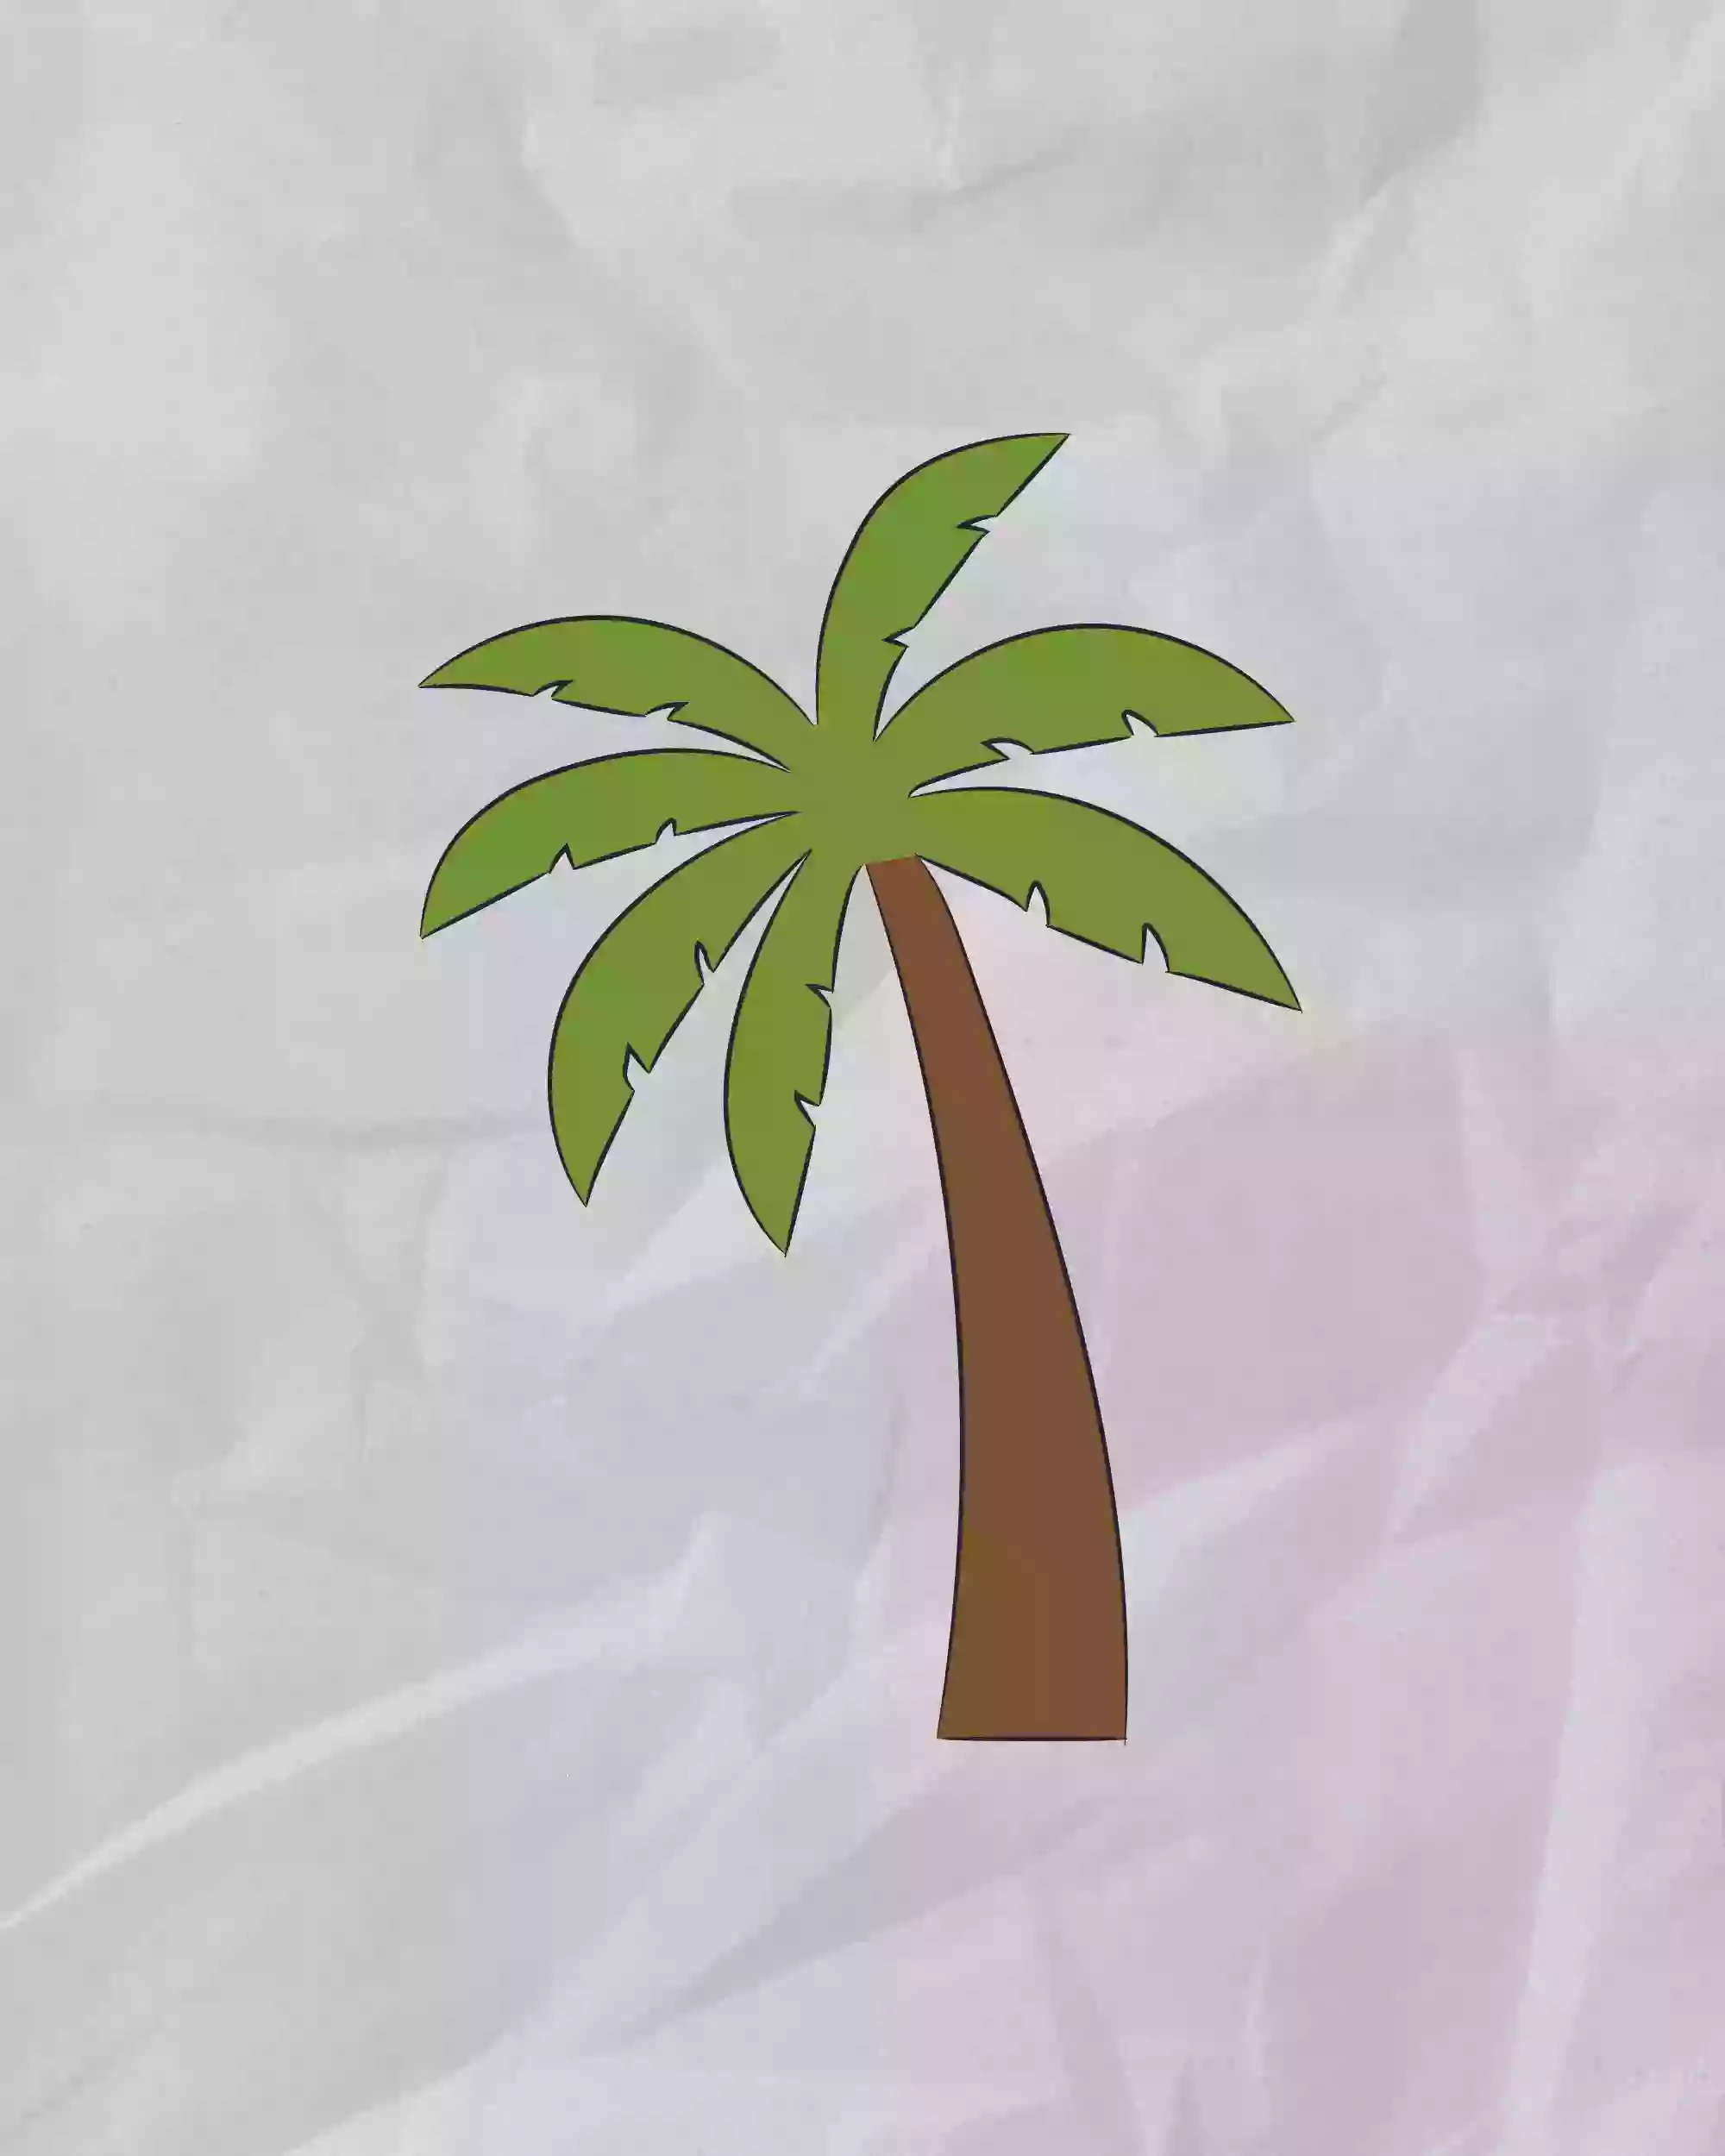 How to Draw a Palm Tree - EASY Step by Step Tutorial